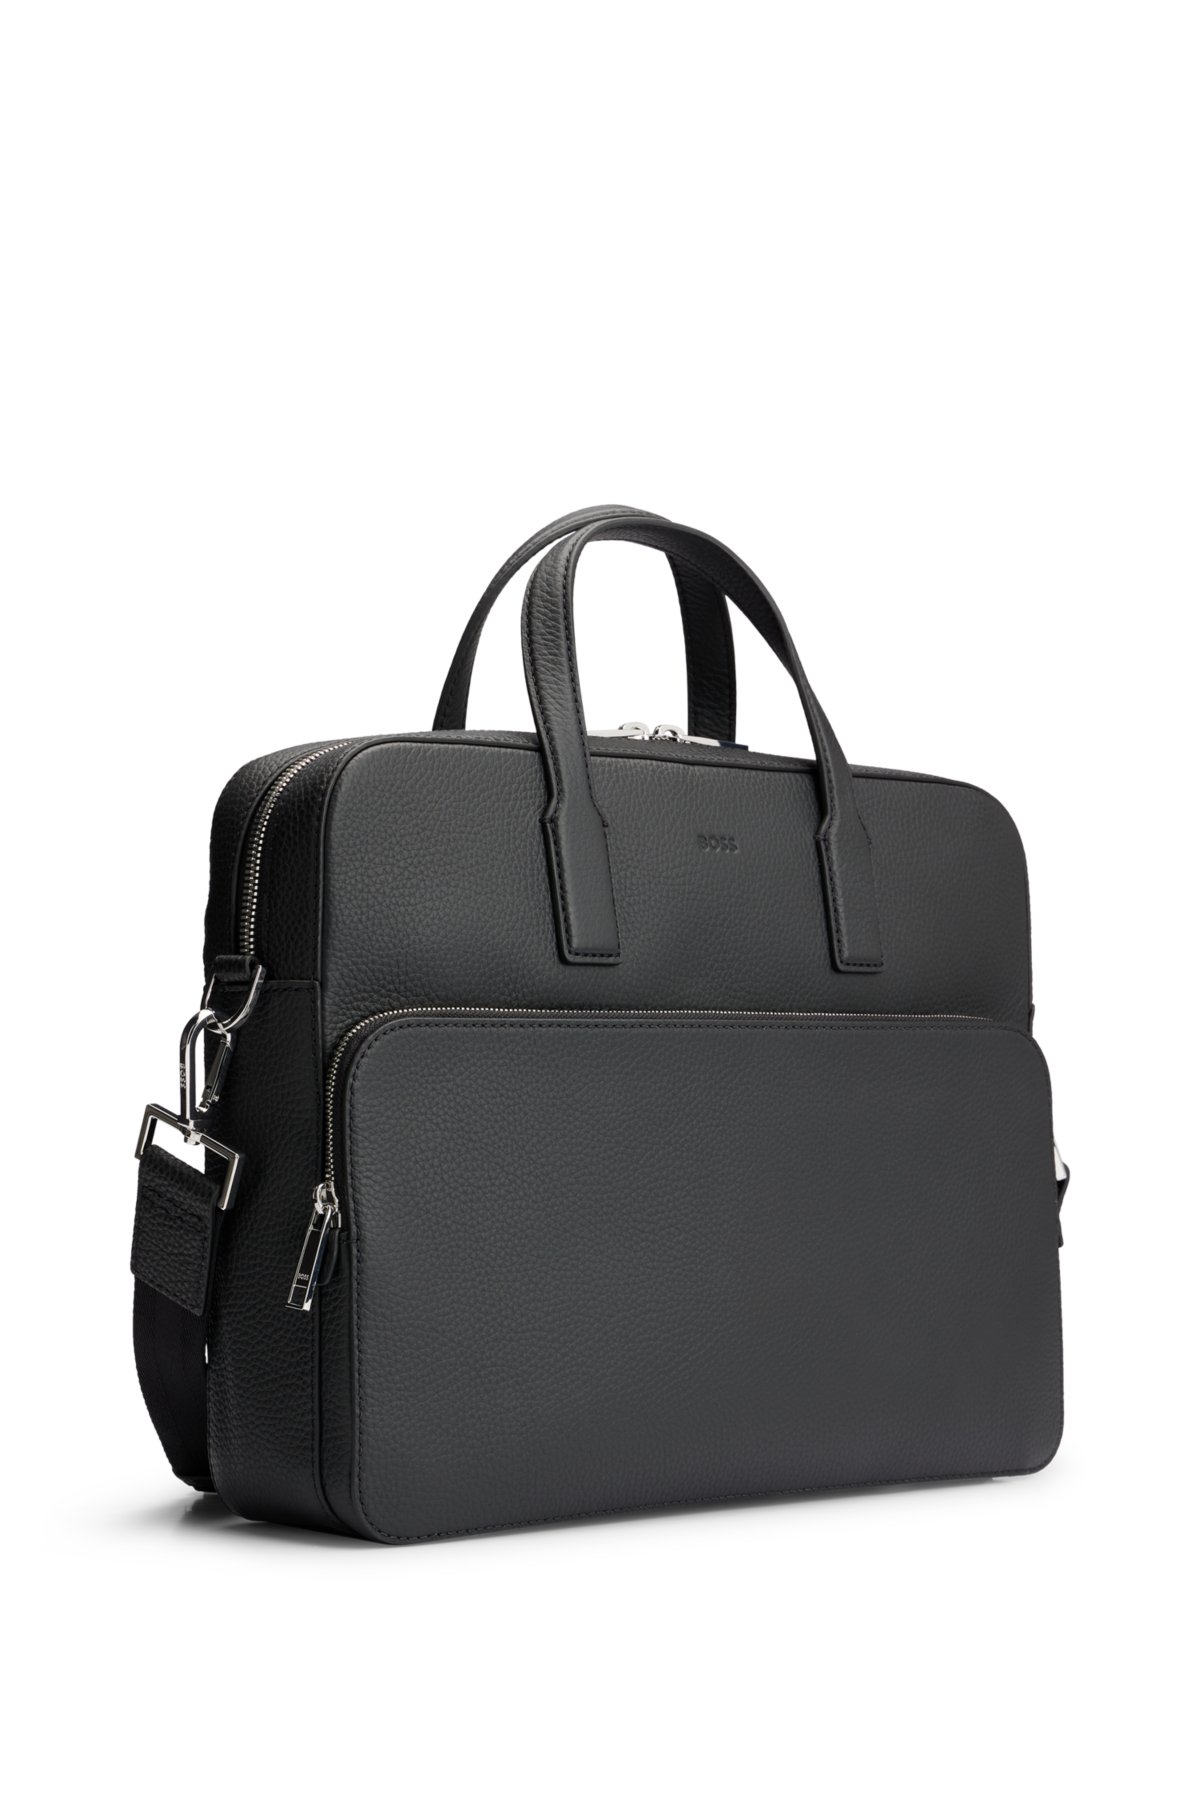 Document case in Italian leather with embossed logo, Black